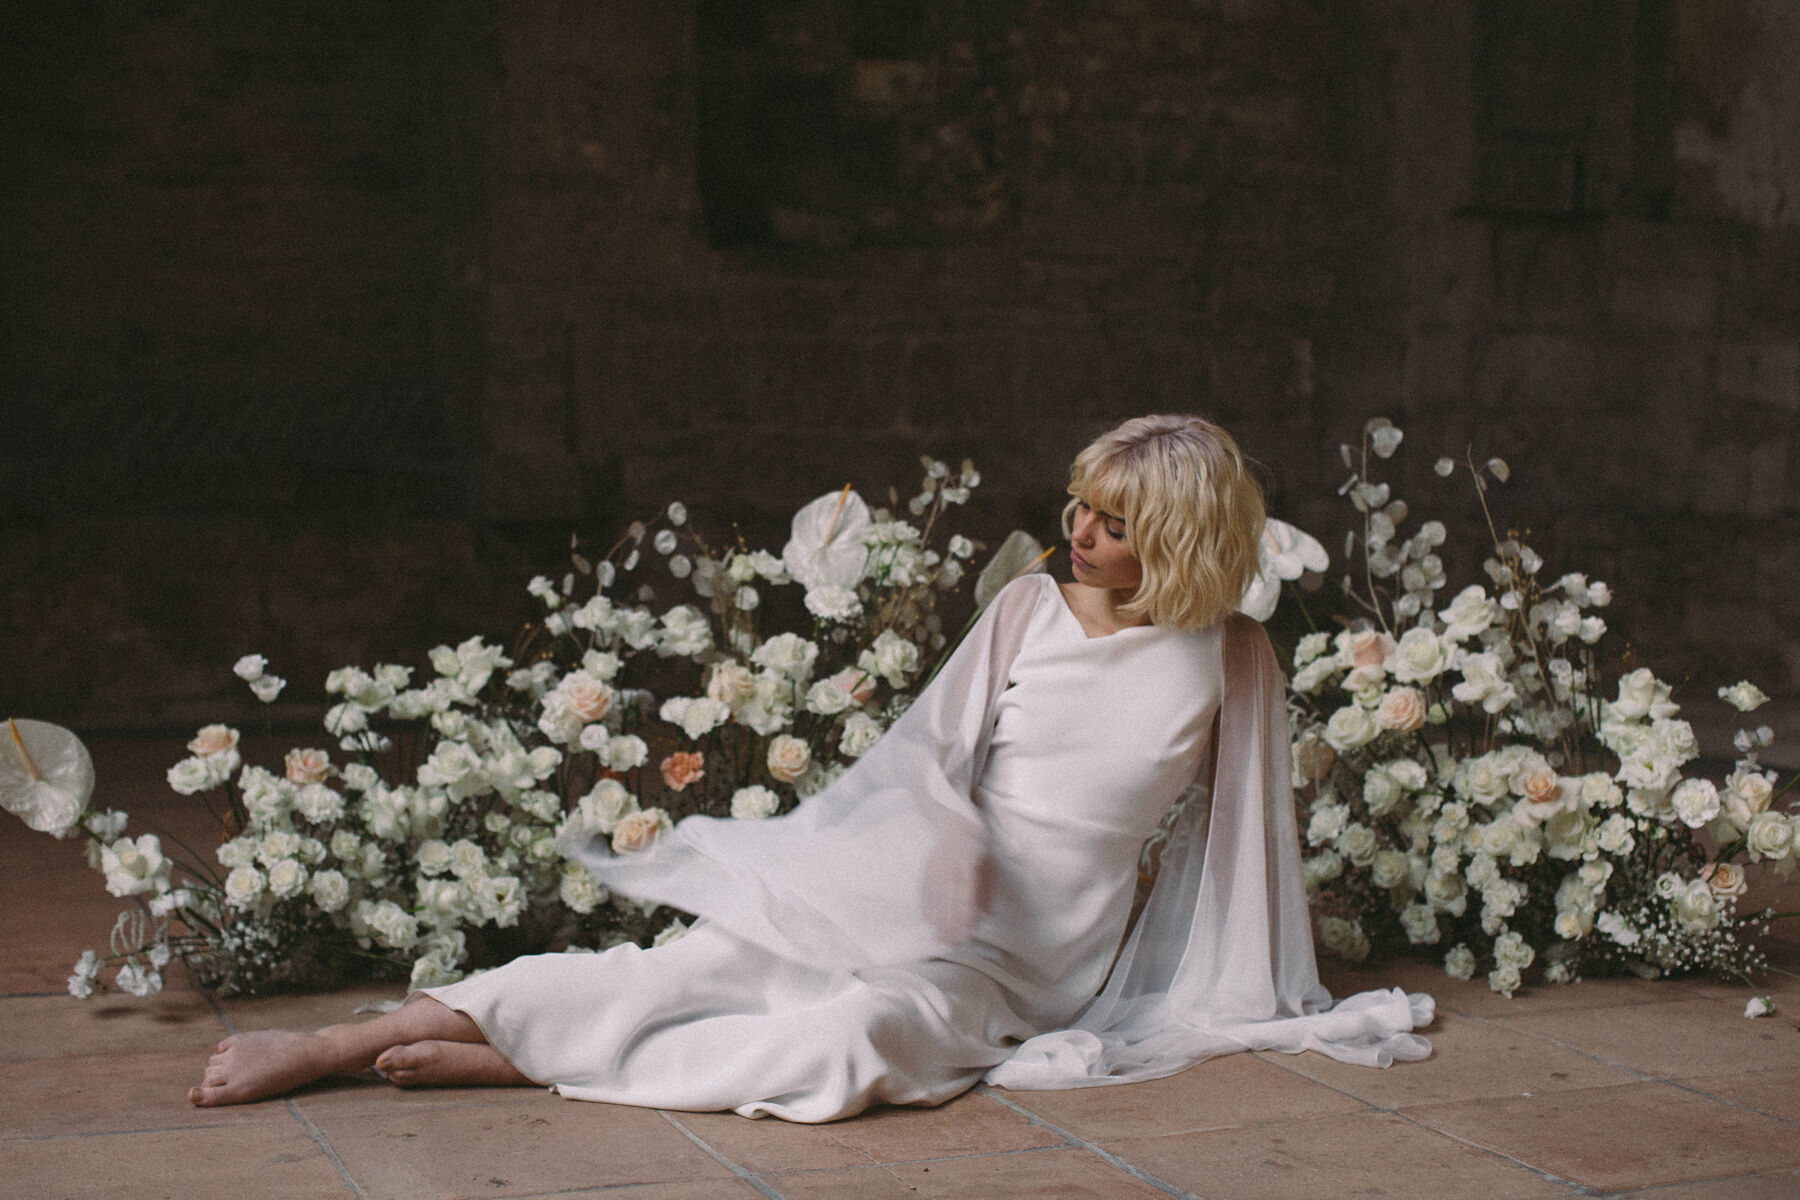 Bride wearing a modern bohemian wedding dress by Wilden London. Image by Jess Withey.